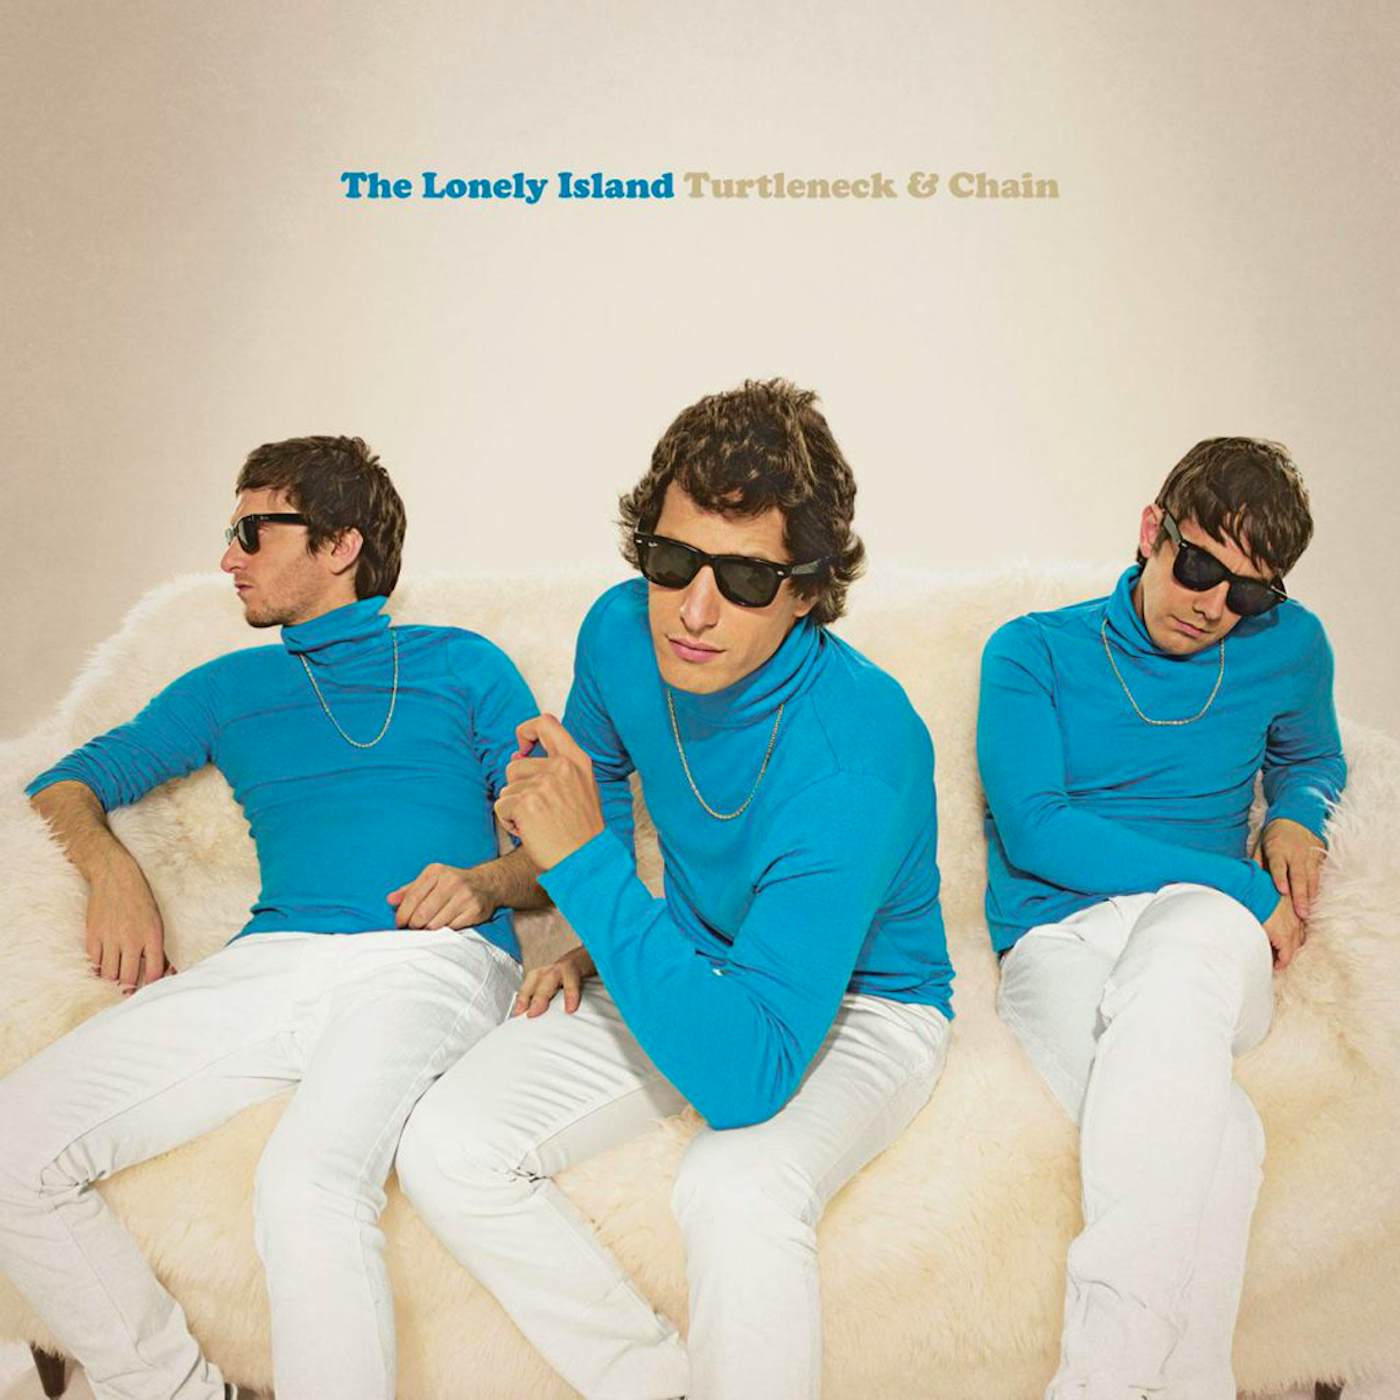 The Lonely Island Turtleneck & Chain CD/DVD